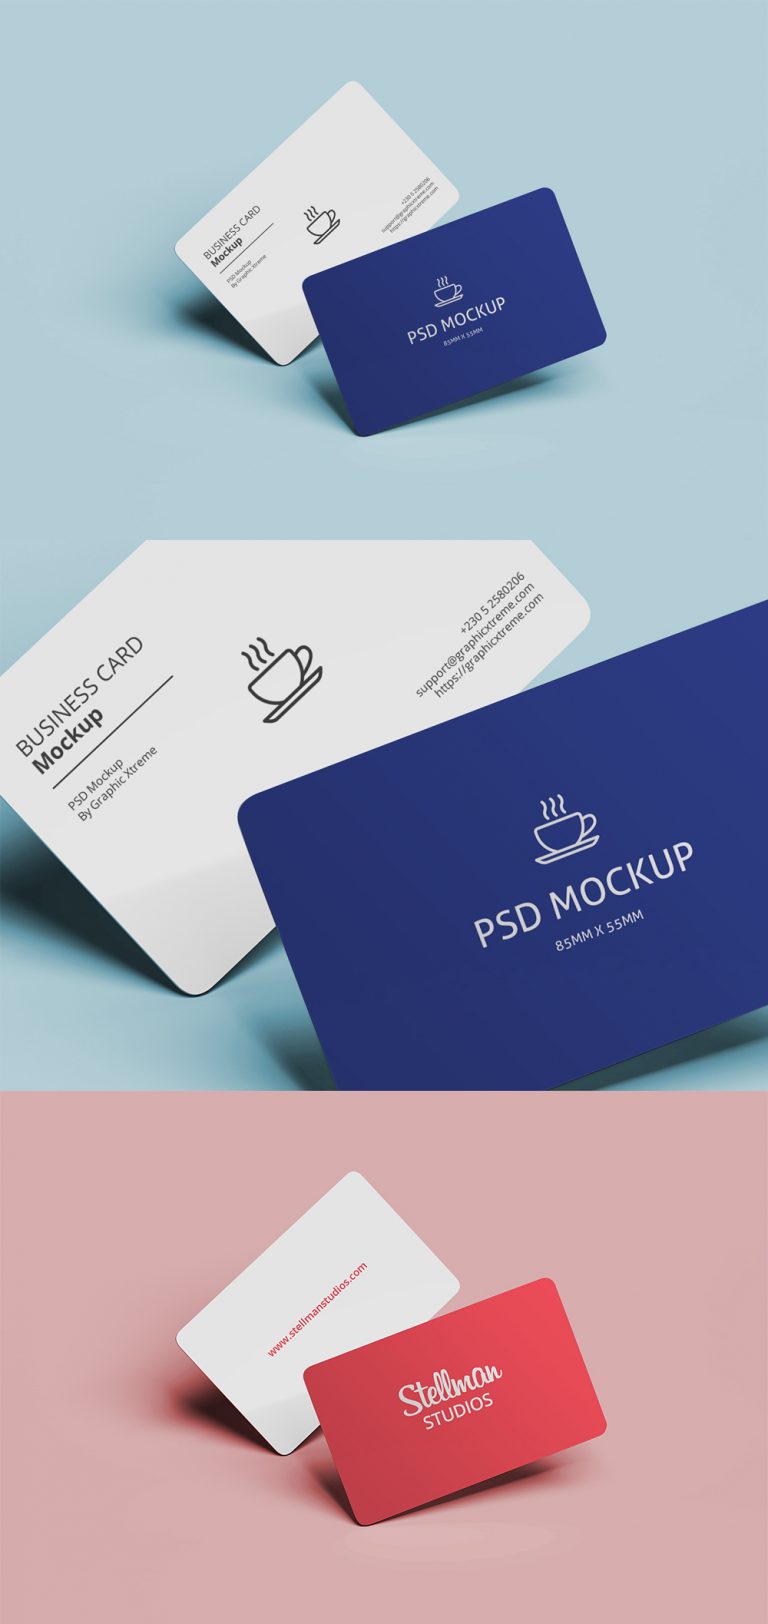 Download Business Card Rounded Corners Mockup - Free Download